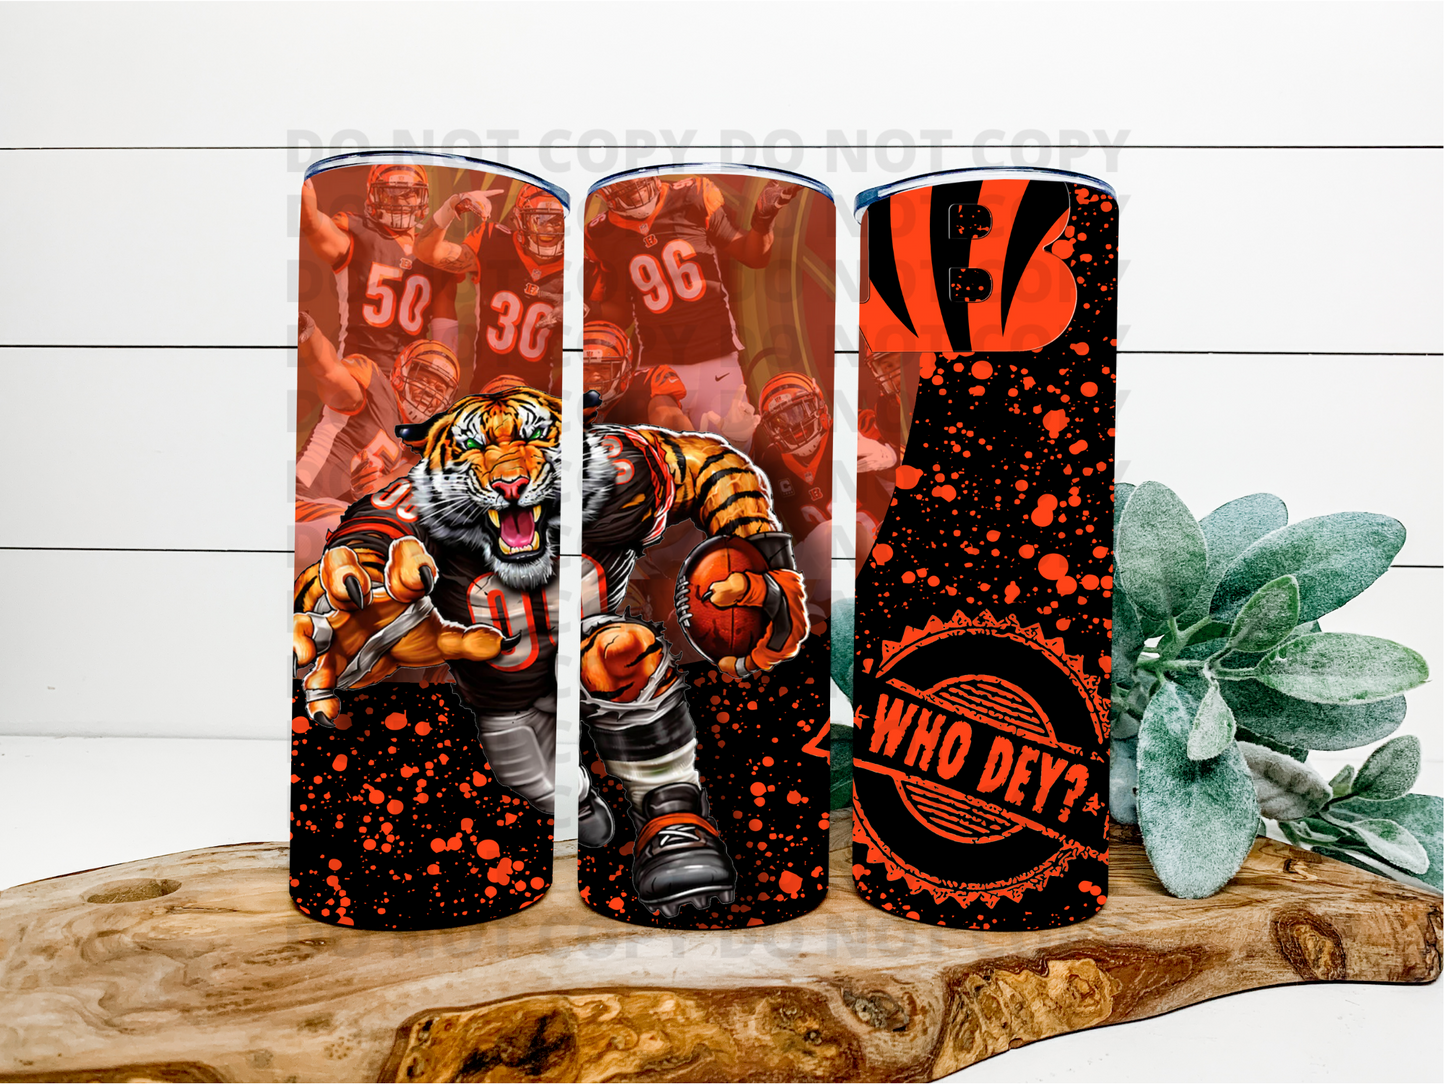 Who Dey Stainless Steel Tumbler